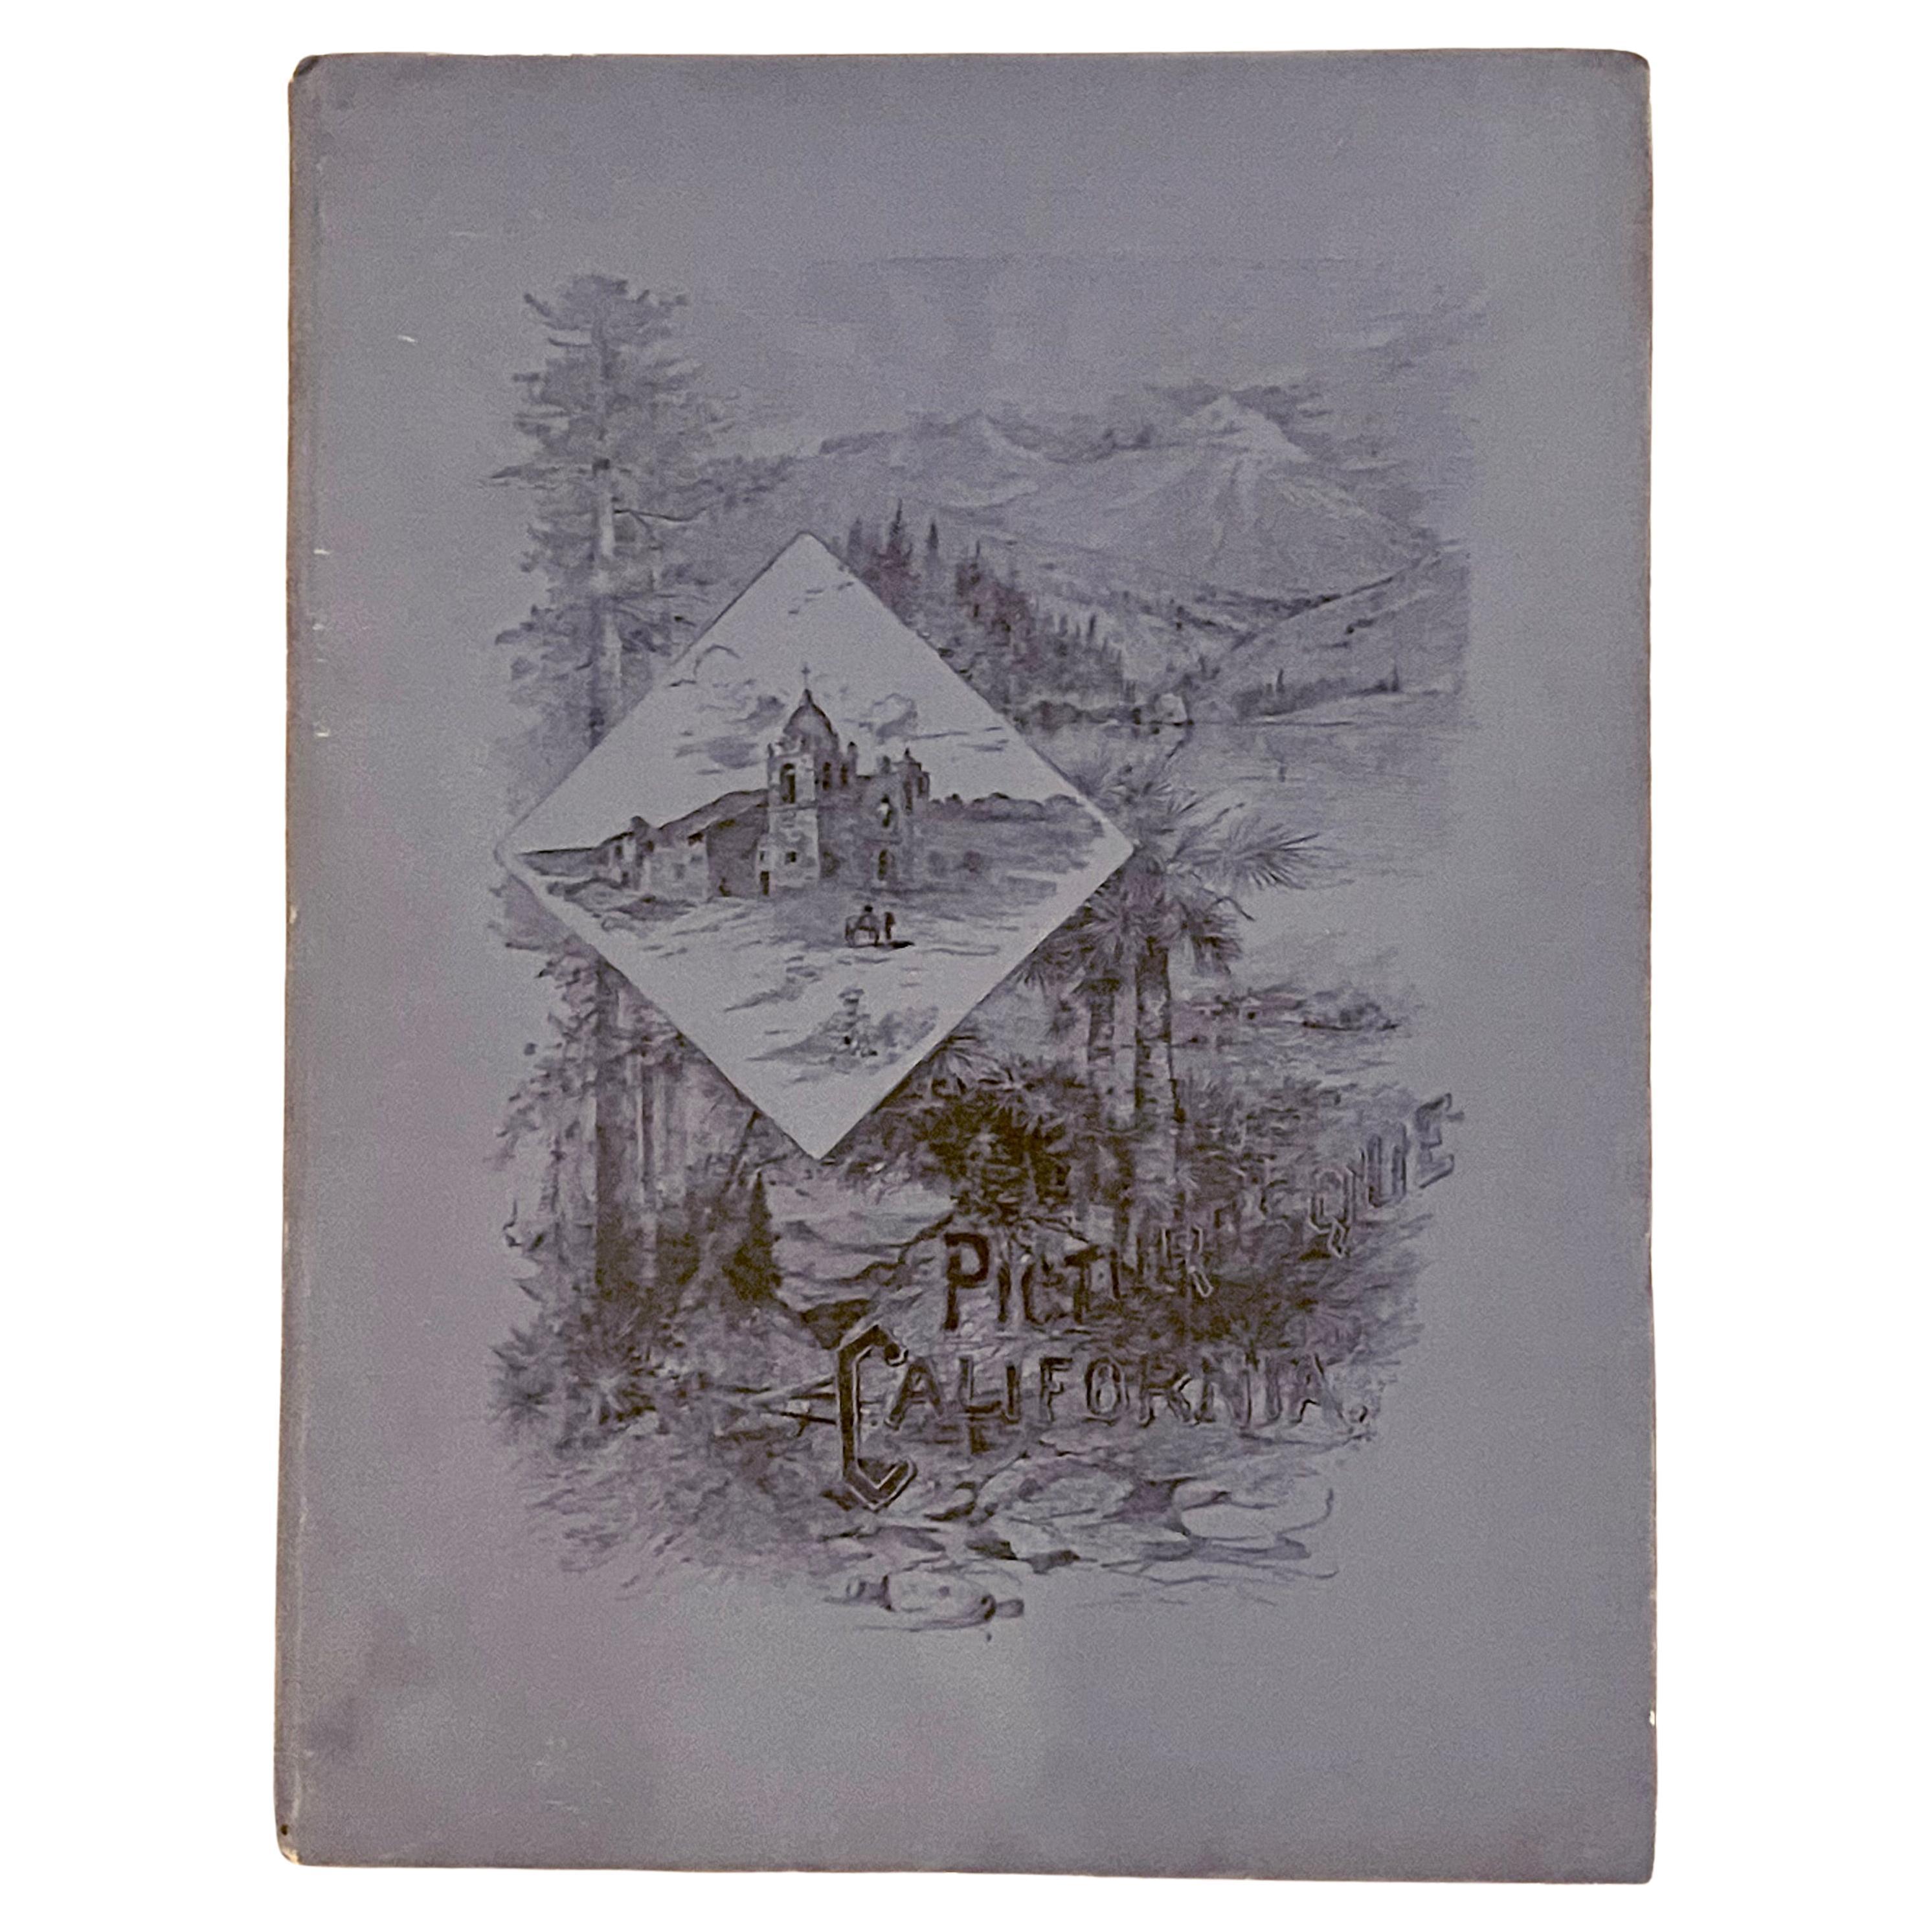 John Muir Editor, Picturesque California, The Rocky Mountains & Pacific Slope For Sale